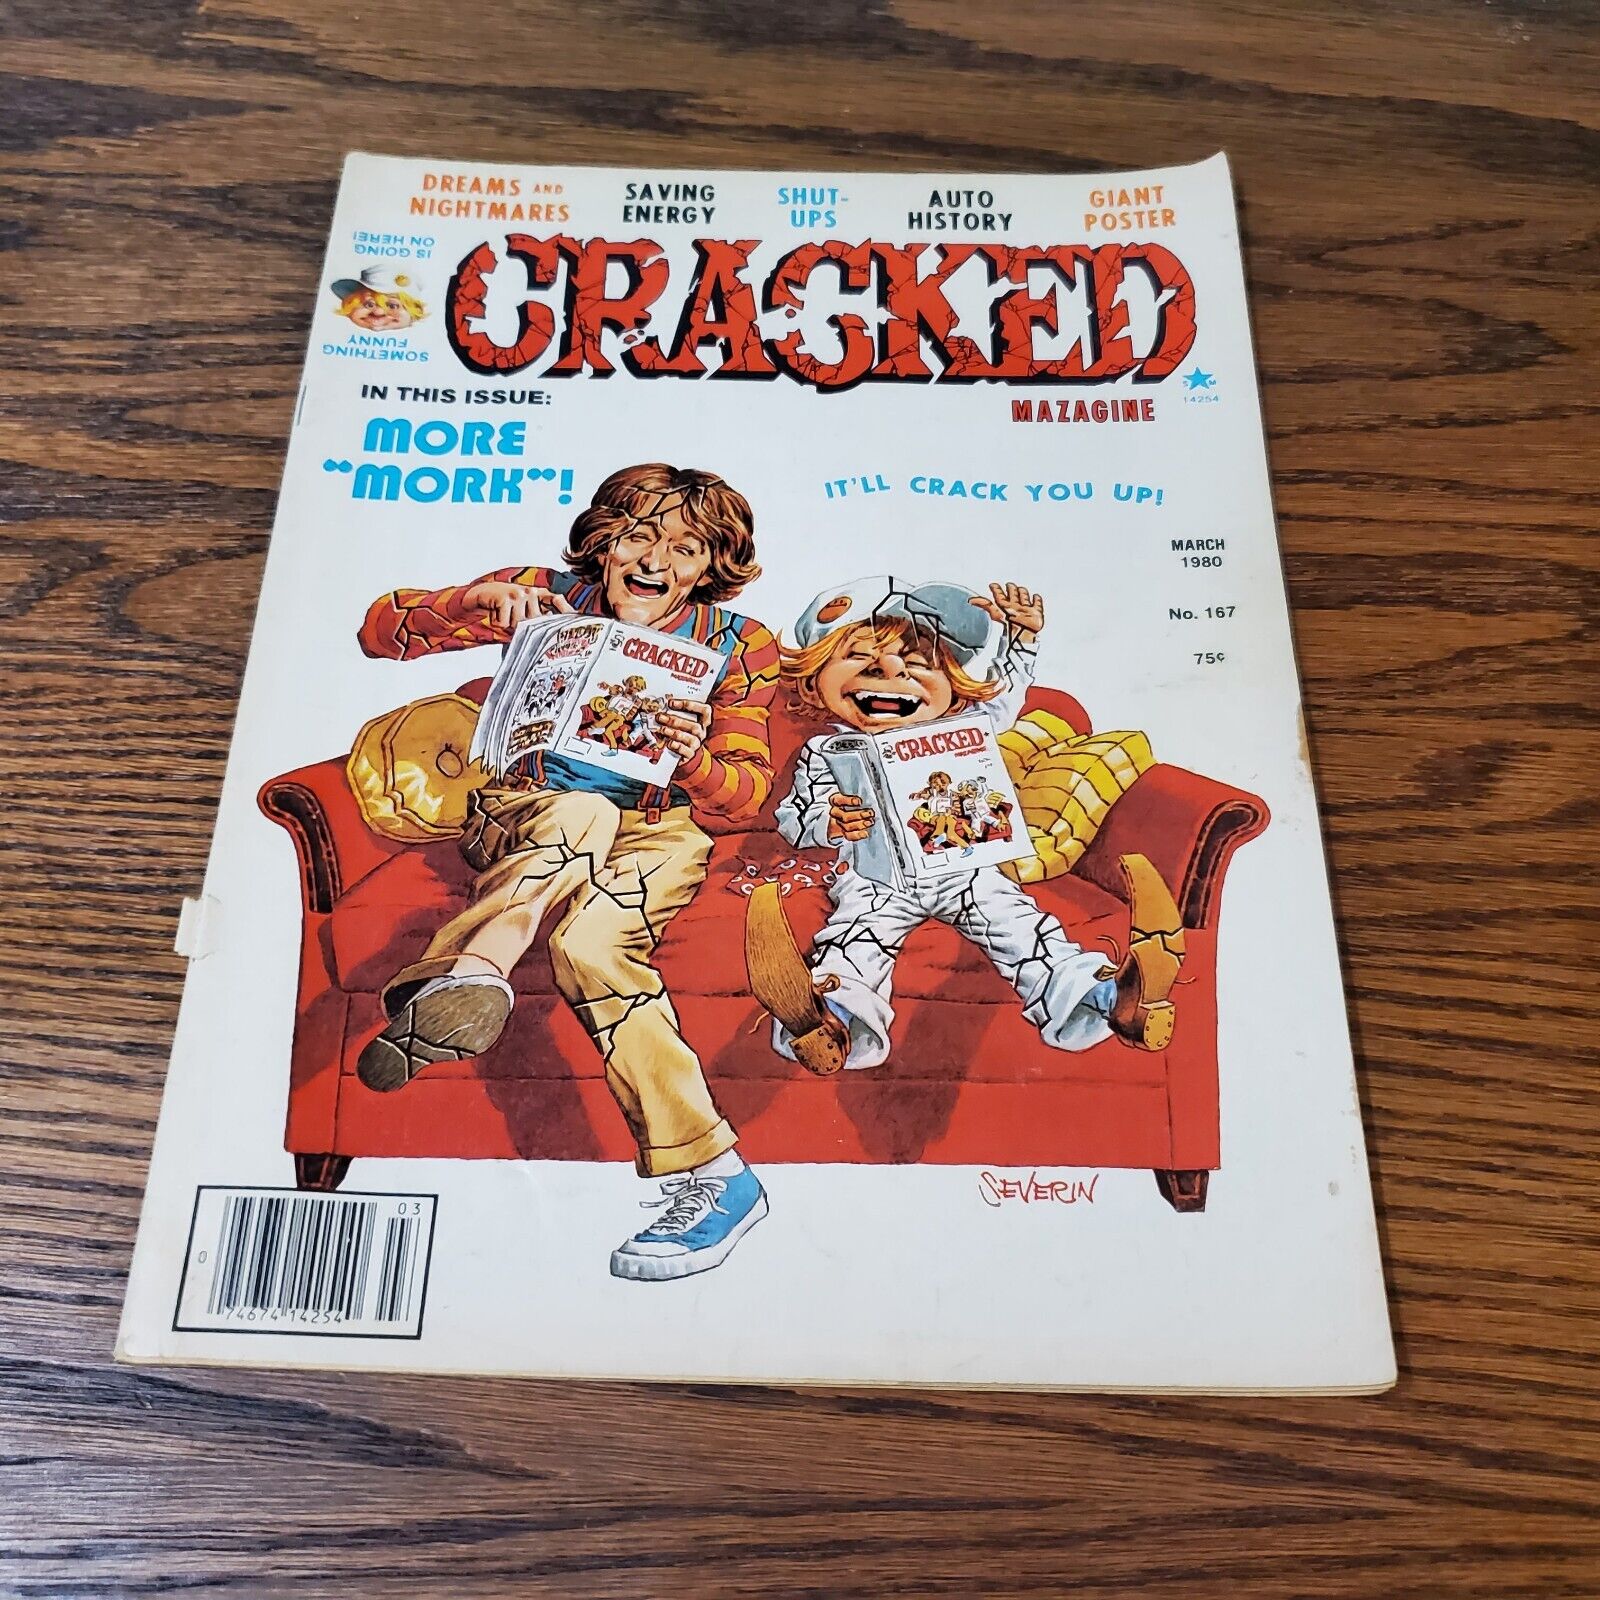 CRACKED MAGAZINE #167 CANDAR PUBLISHING CORP. 1980 FN- ROBIN WILLIAMS COVER